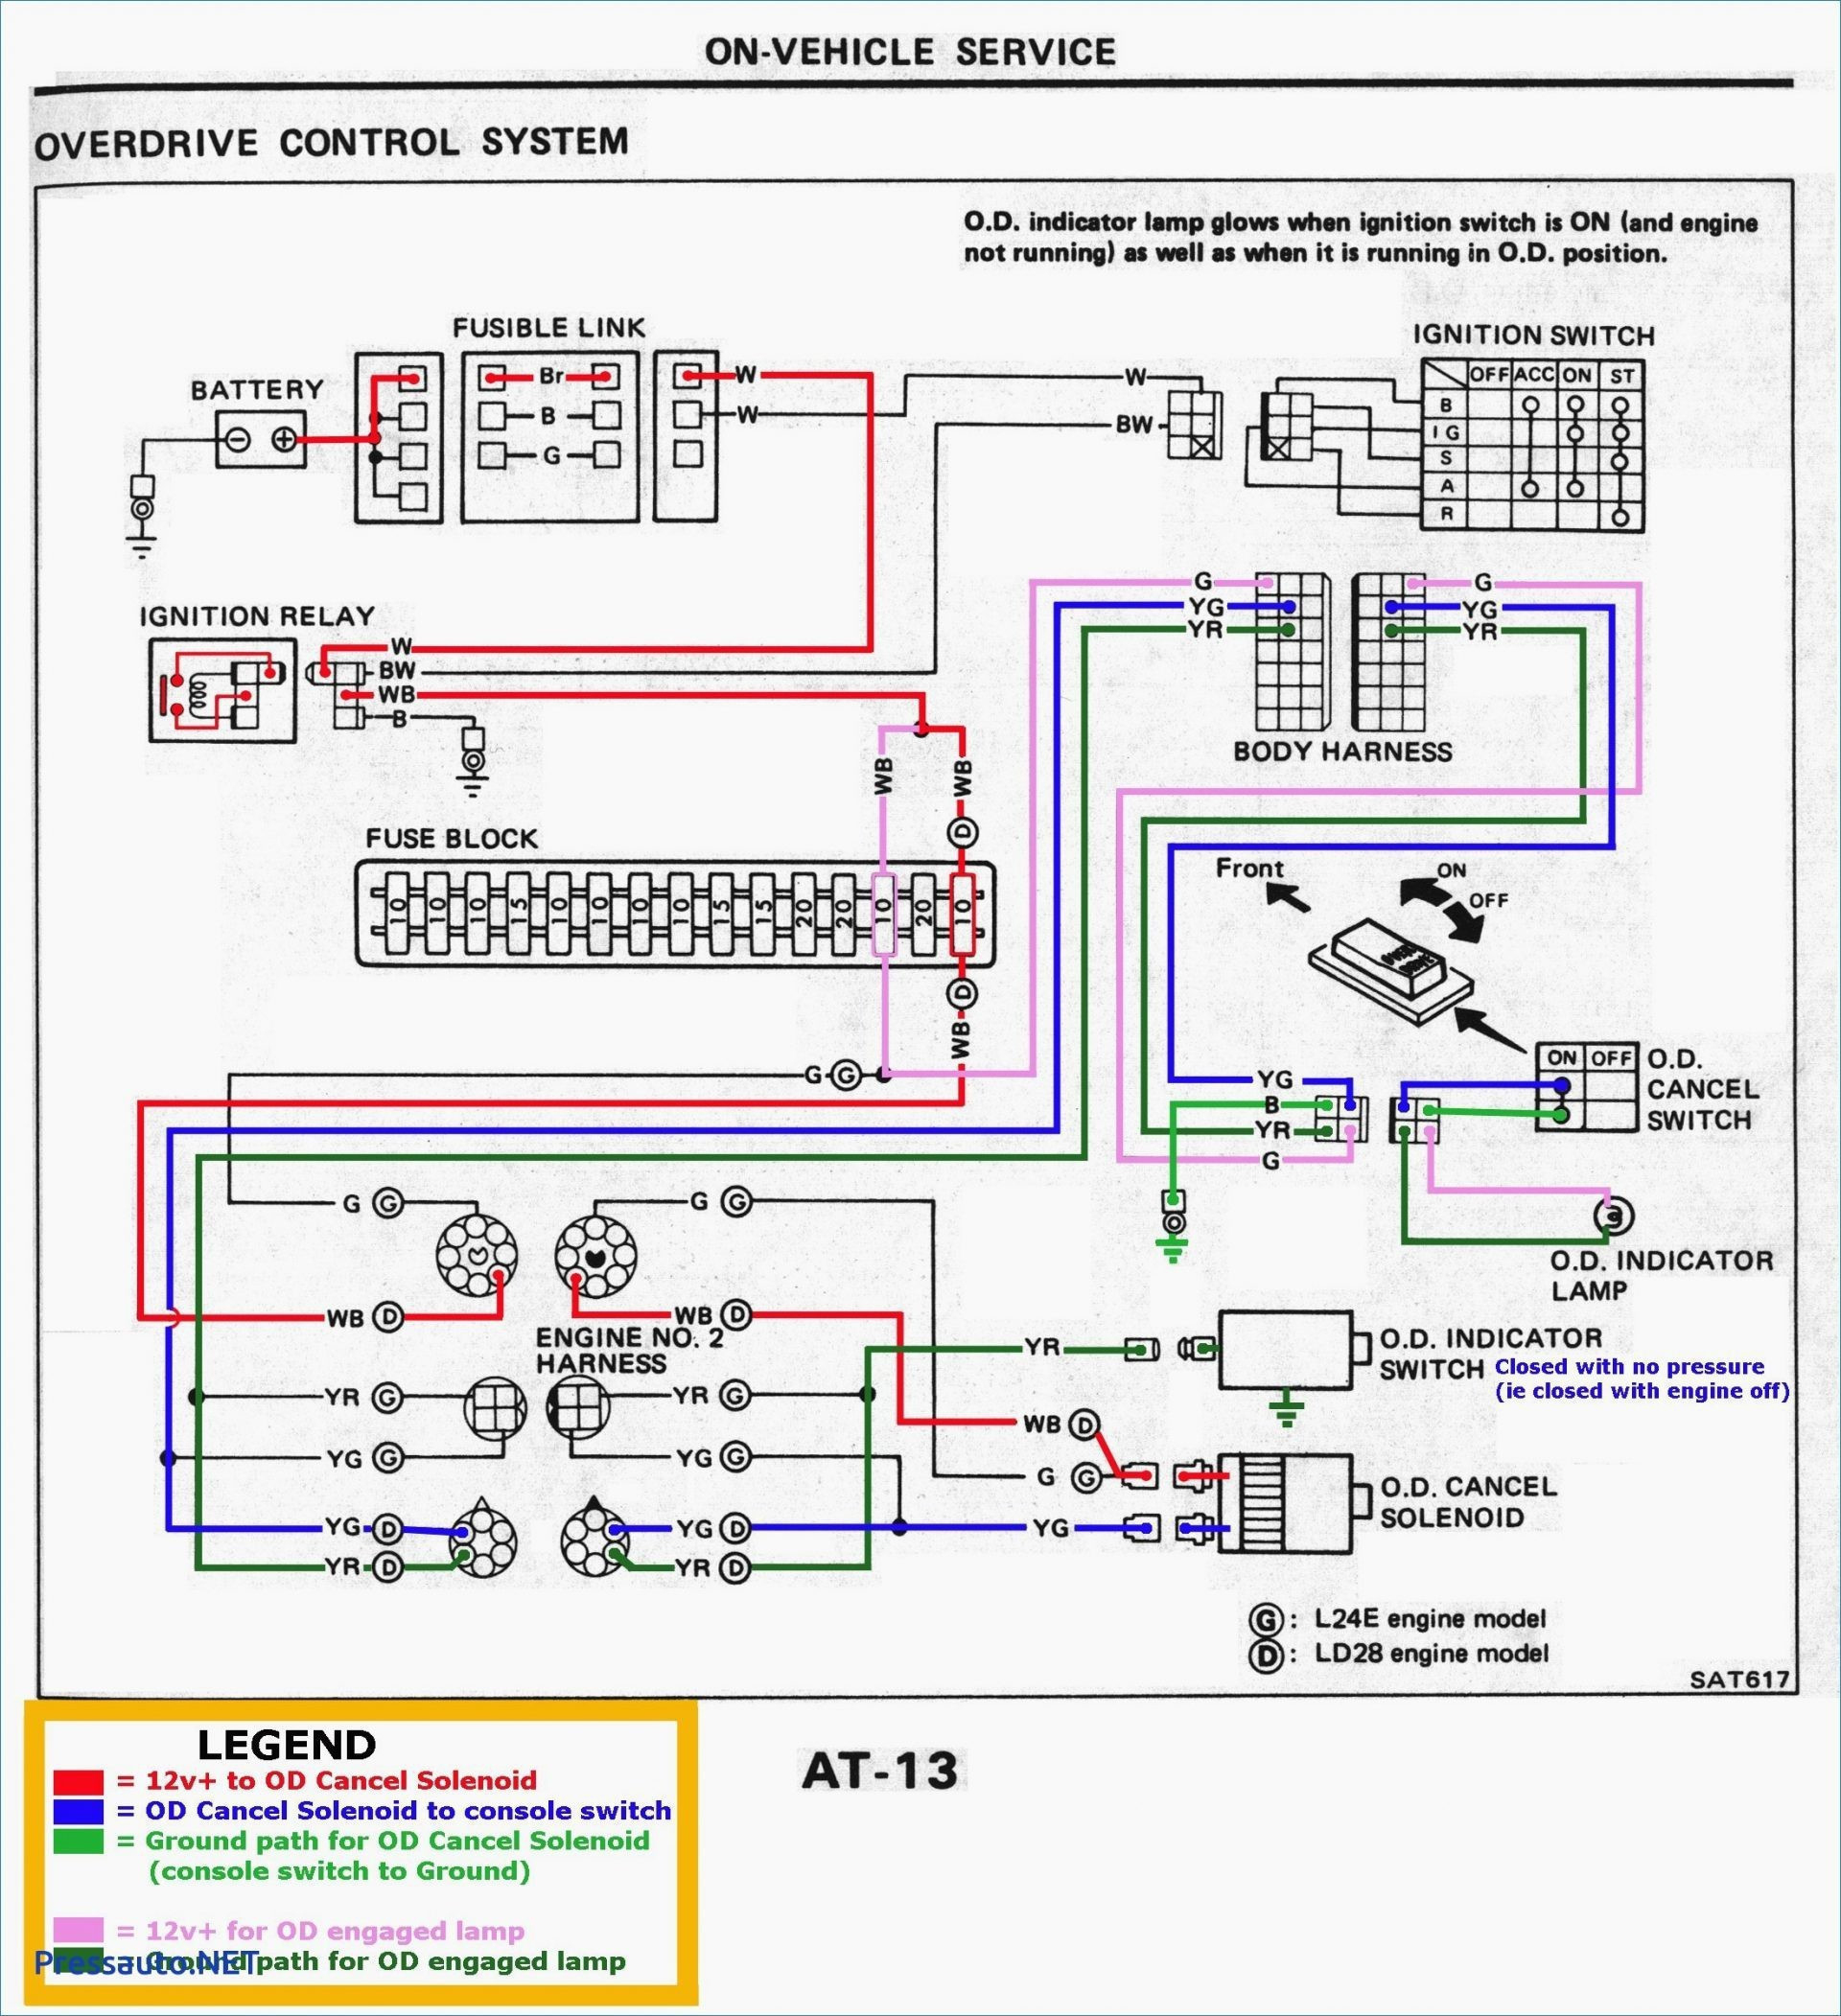 Automotive Wiring Diagram Software Simplified Shapes Automotive - Automotive Wiring Diagram Software